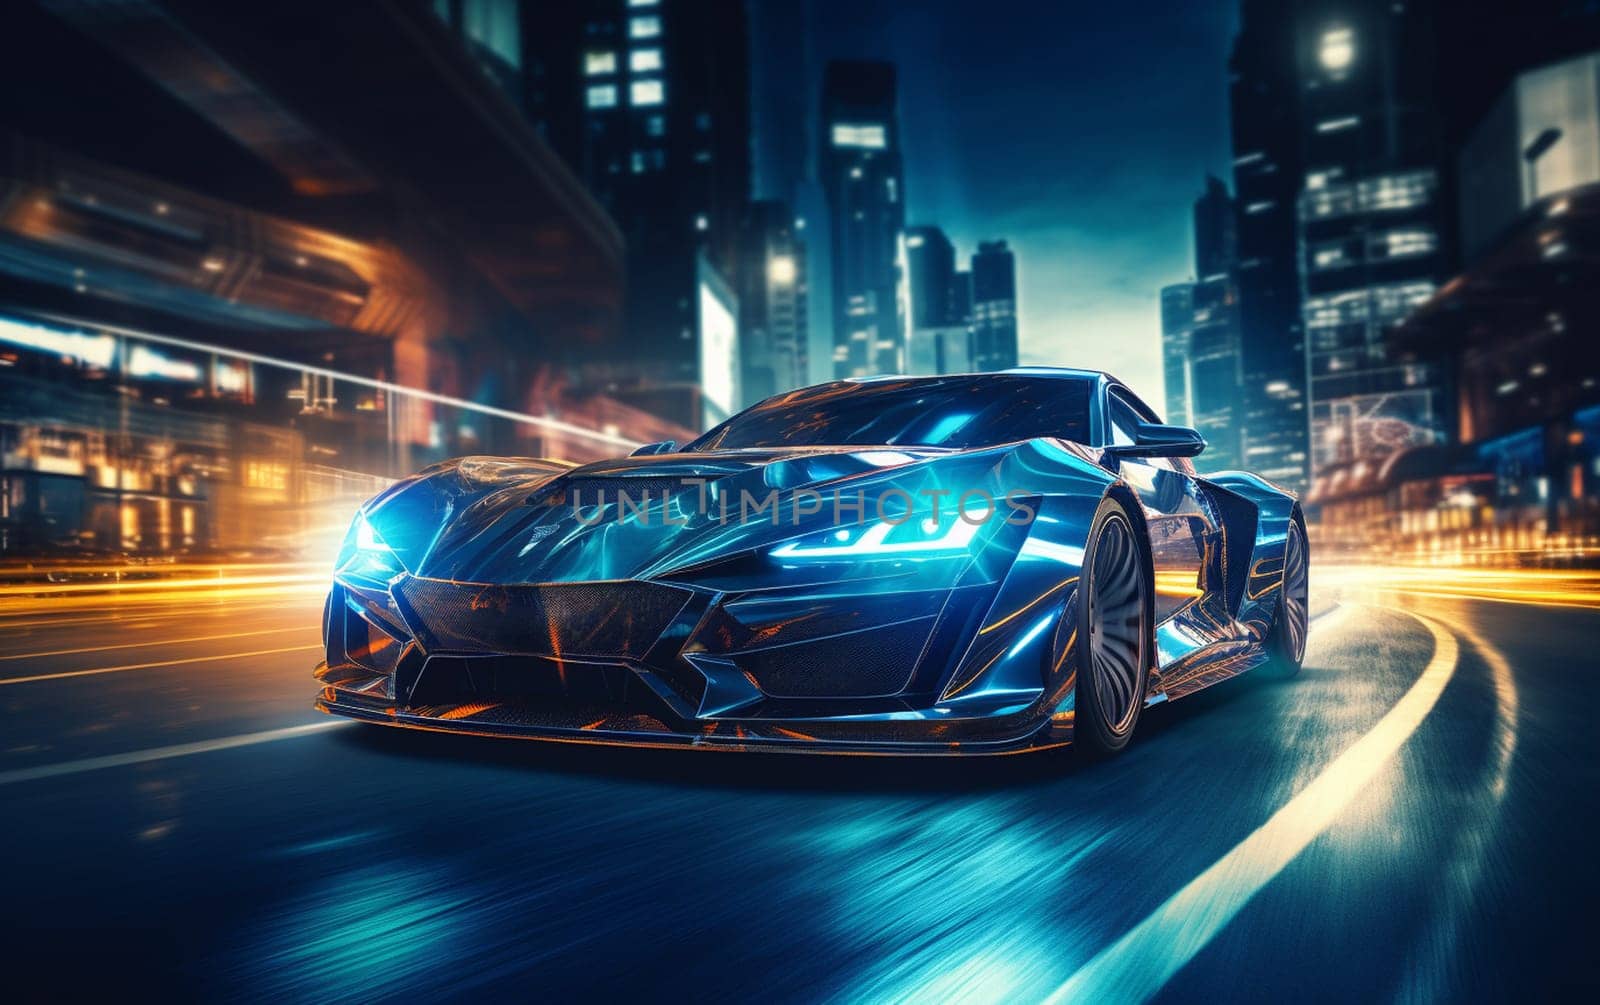 Futuristic Sports Car On Neon Highway. Powerful acceleration of a supercar on a night track with colorful lights and trails. 3d illustration